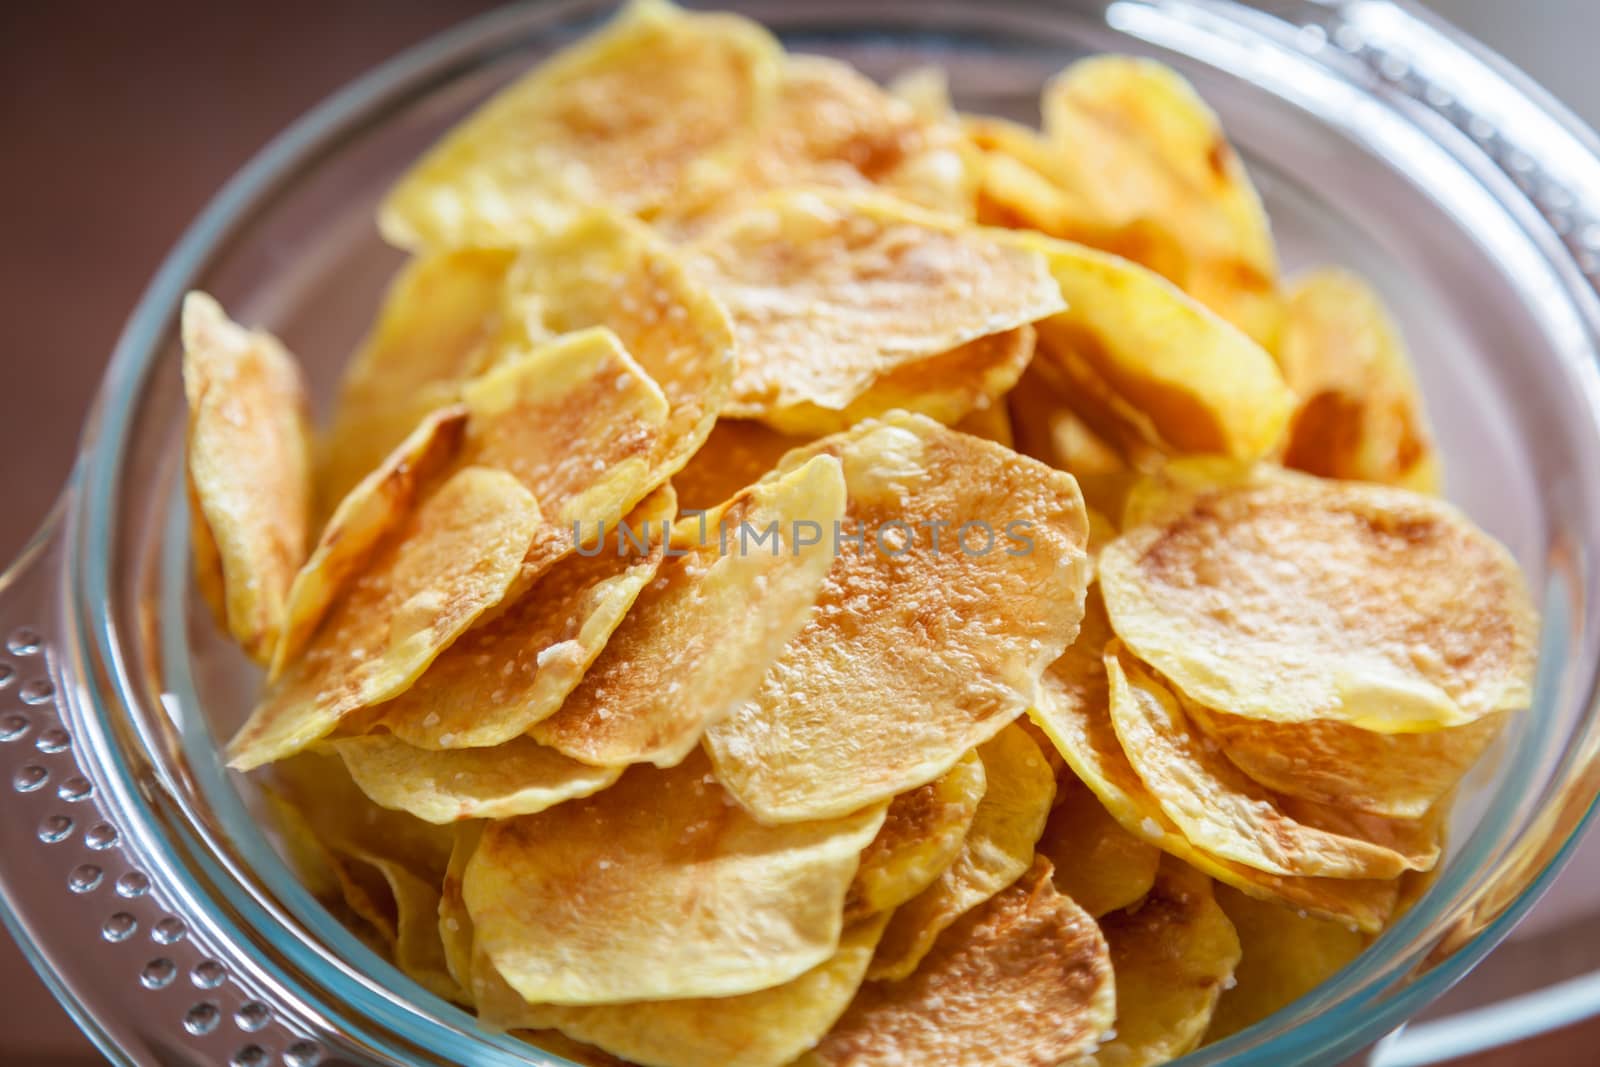 Delicious homemade potato chips in a glass bowl